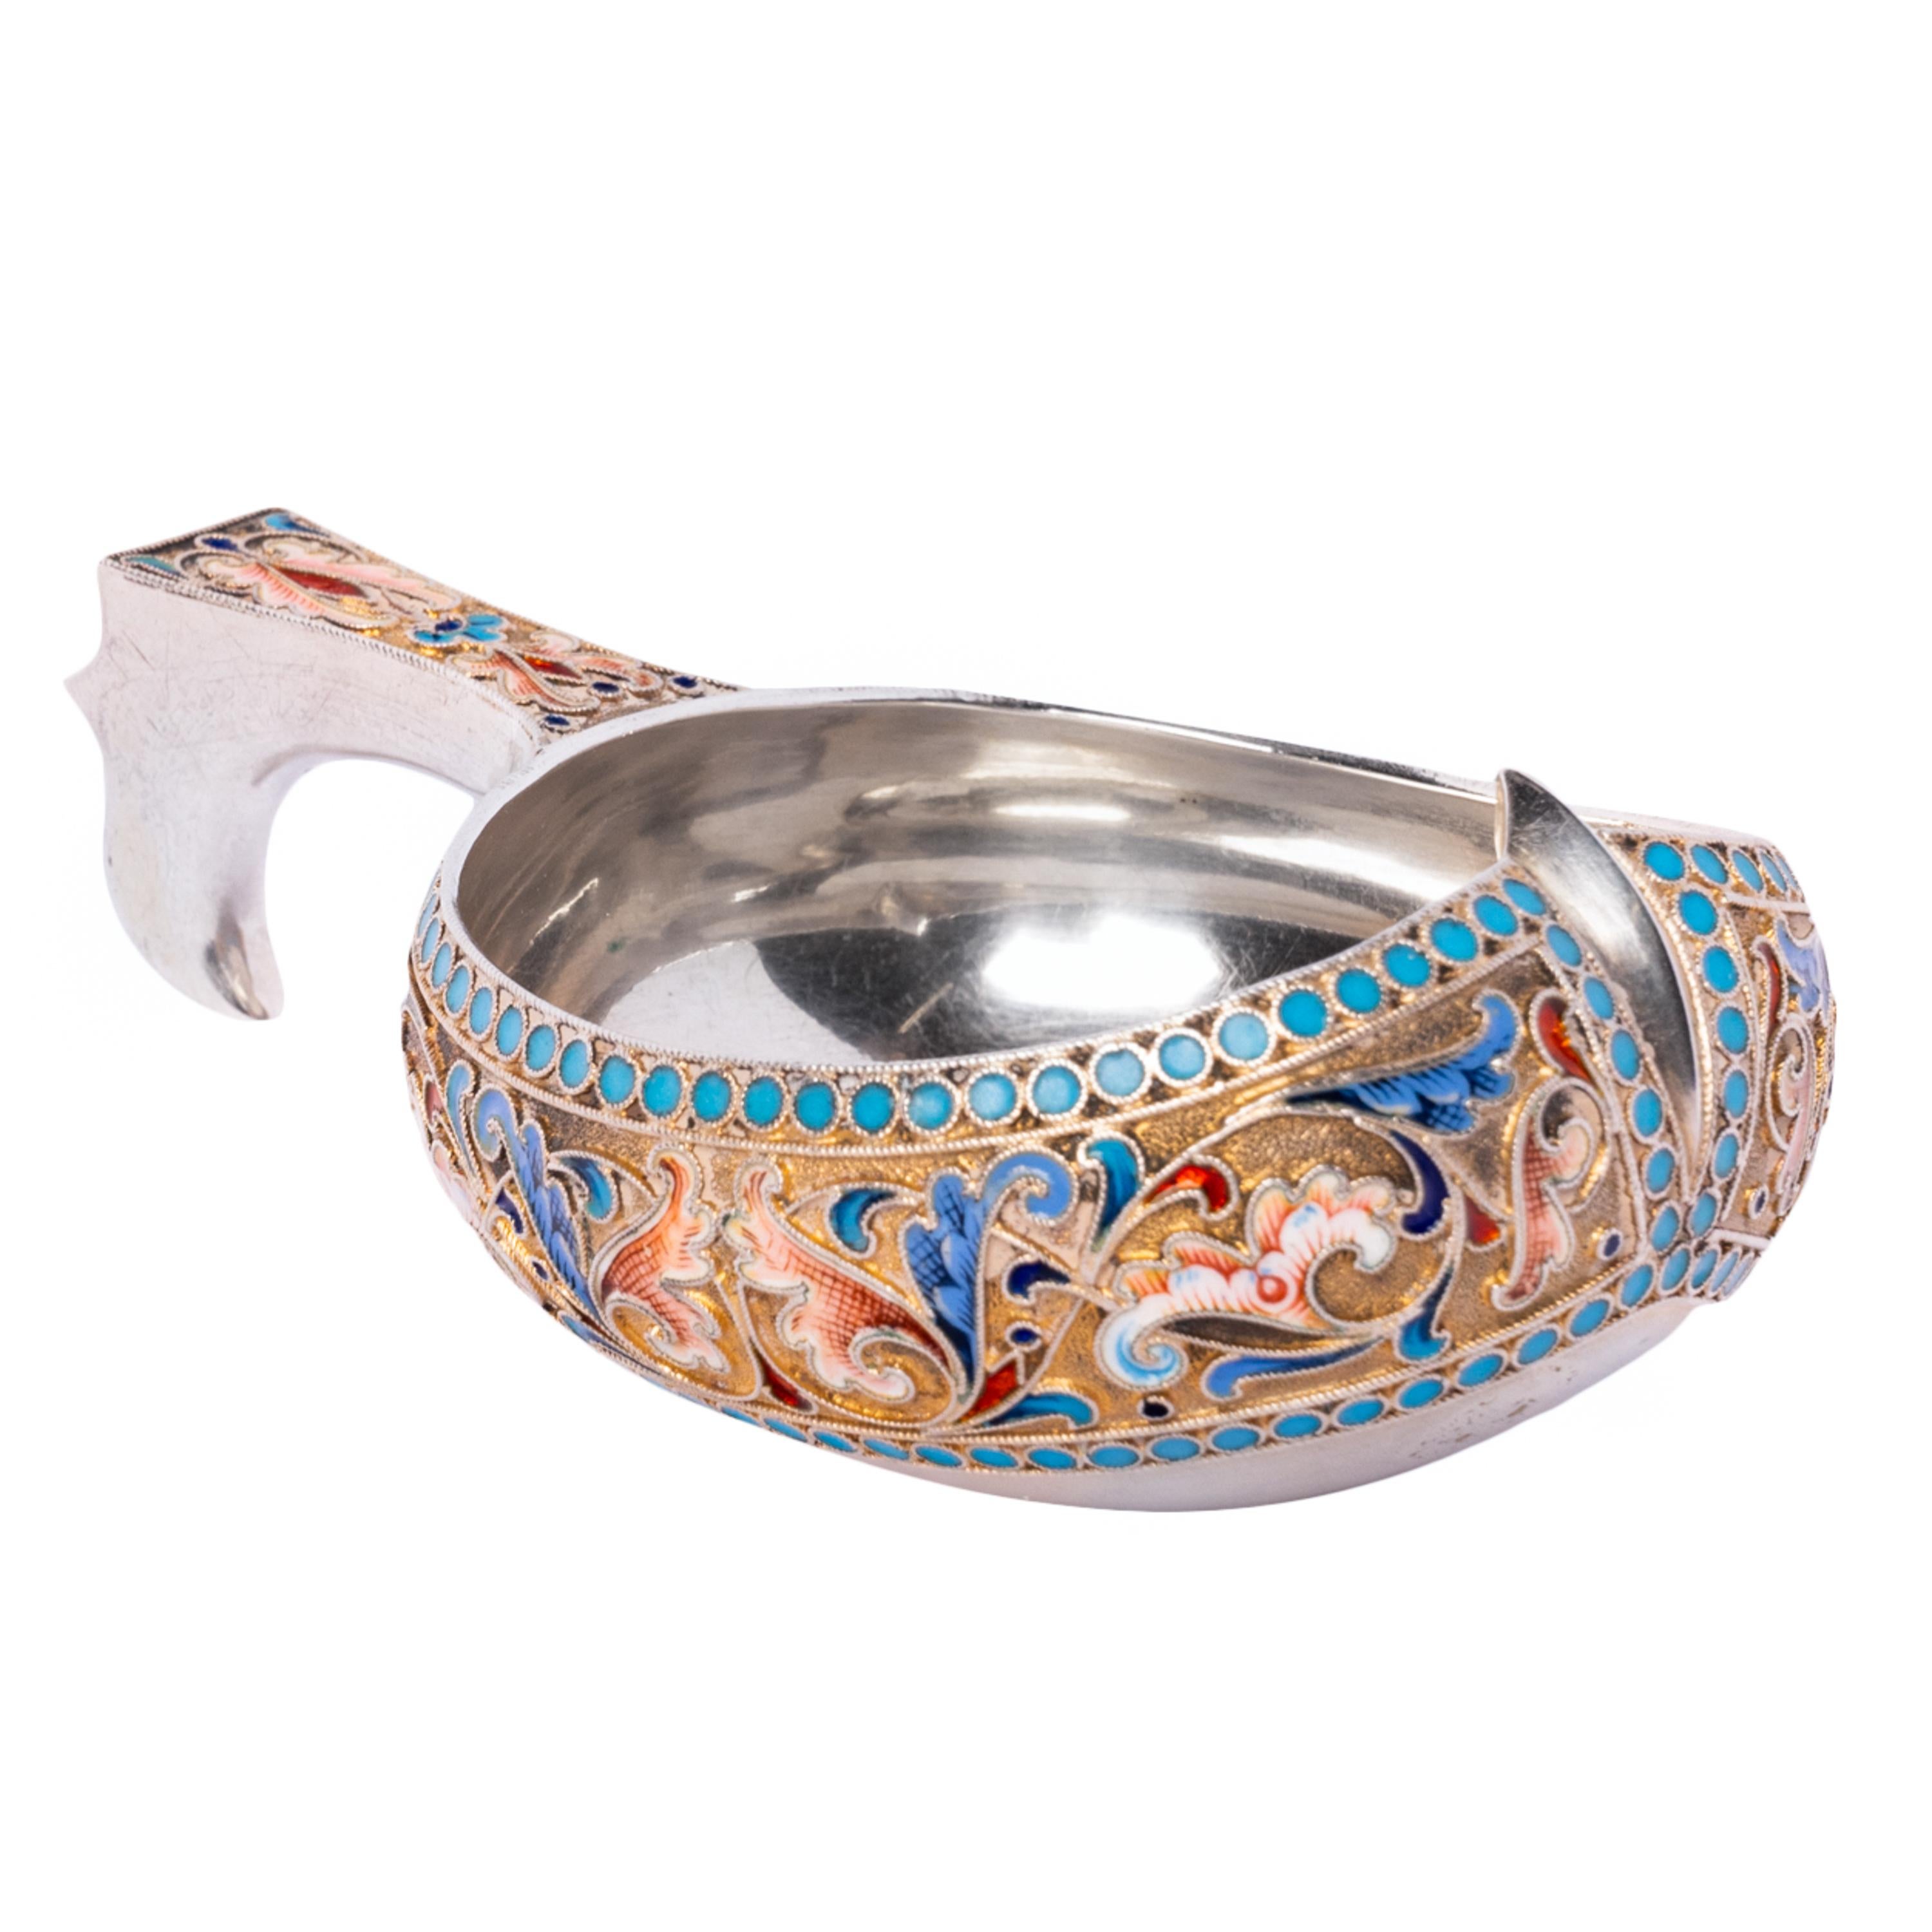 A fine antique Russian Imperial silver & cloisonne kovsh, Pavel Akimov Ovchinnikov, Moscow, 1896.
Ovchinnikov is recognized as one of Russia's most famous enamellers, he produced incredible objects to rival the work of Karl Faberge. His workshops